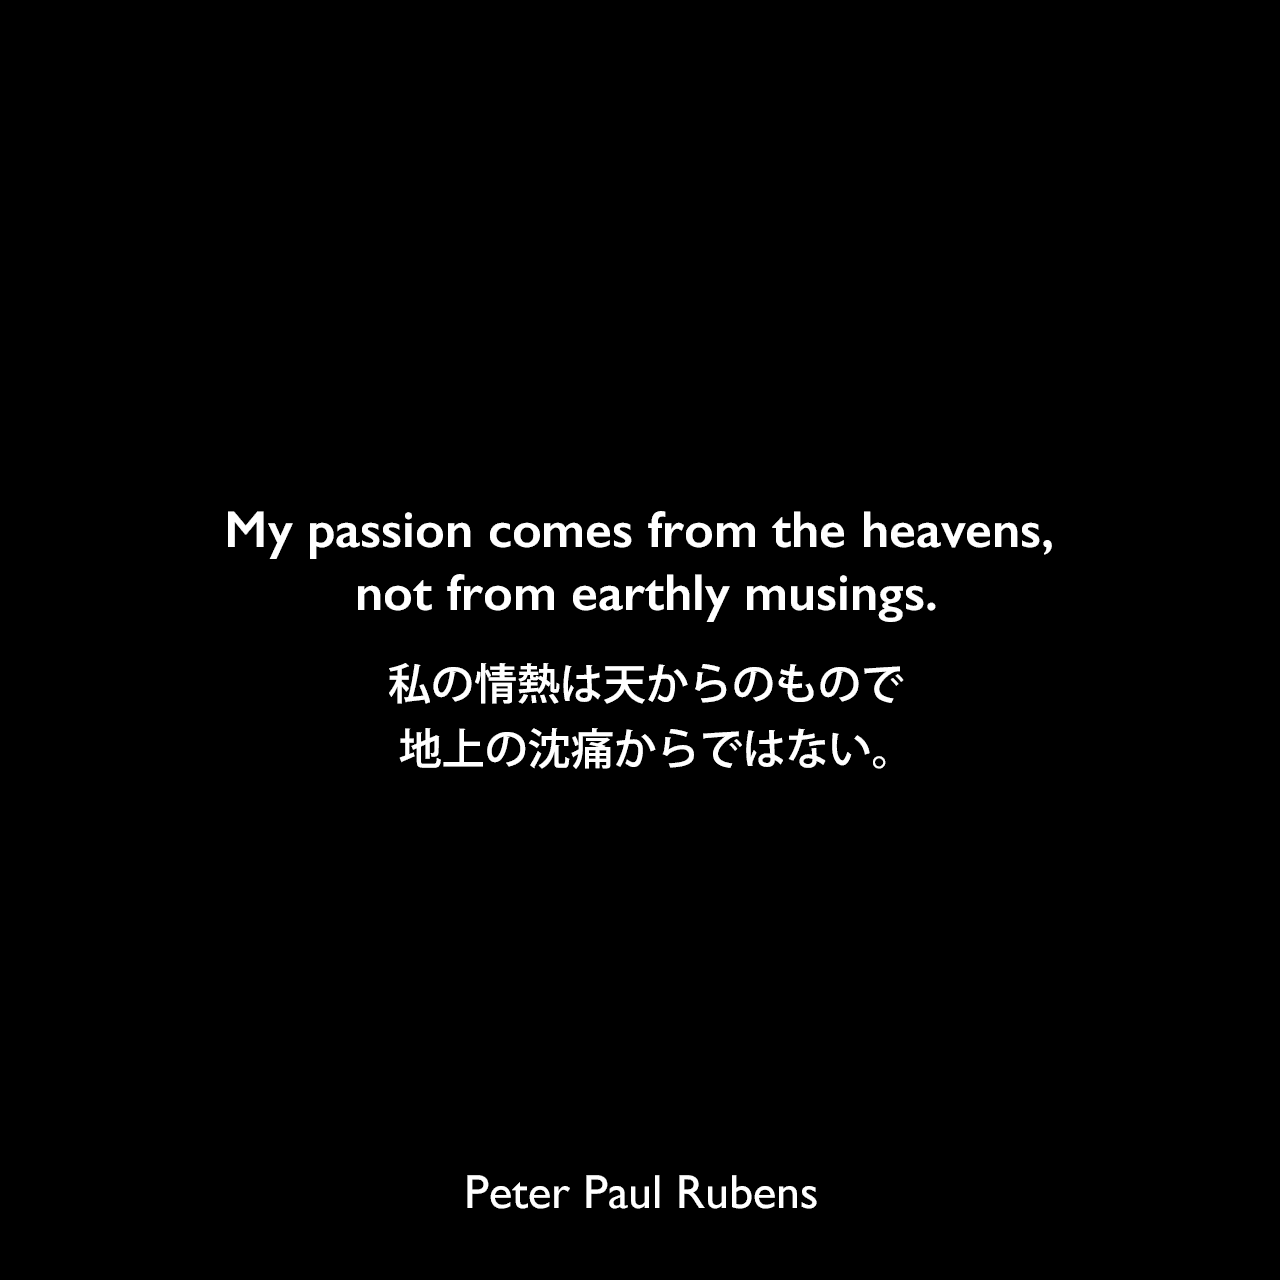 My passion comes from the heavens, not from earthly musings.私の情熱は天からのもので、地上の沈痛からではない。Peter Paul Rubens